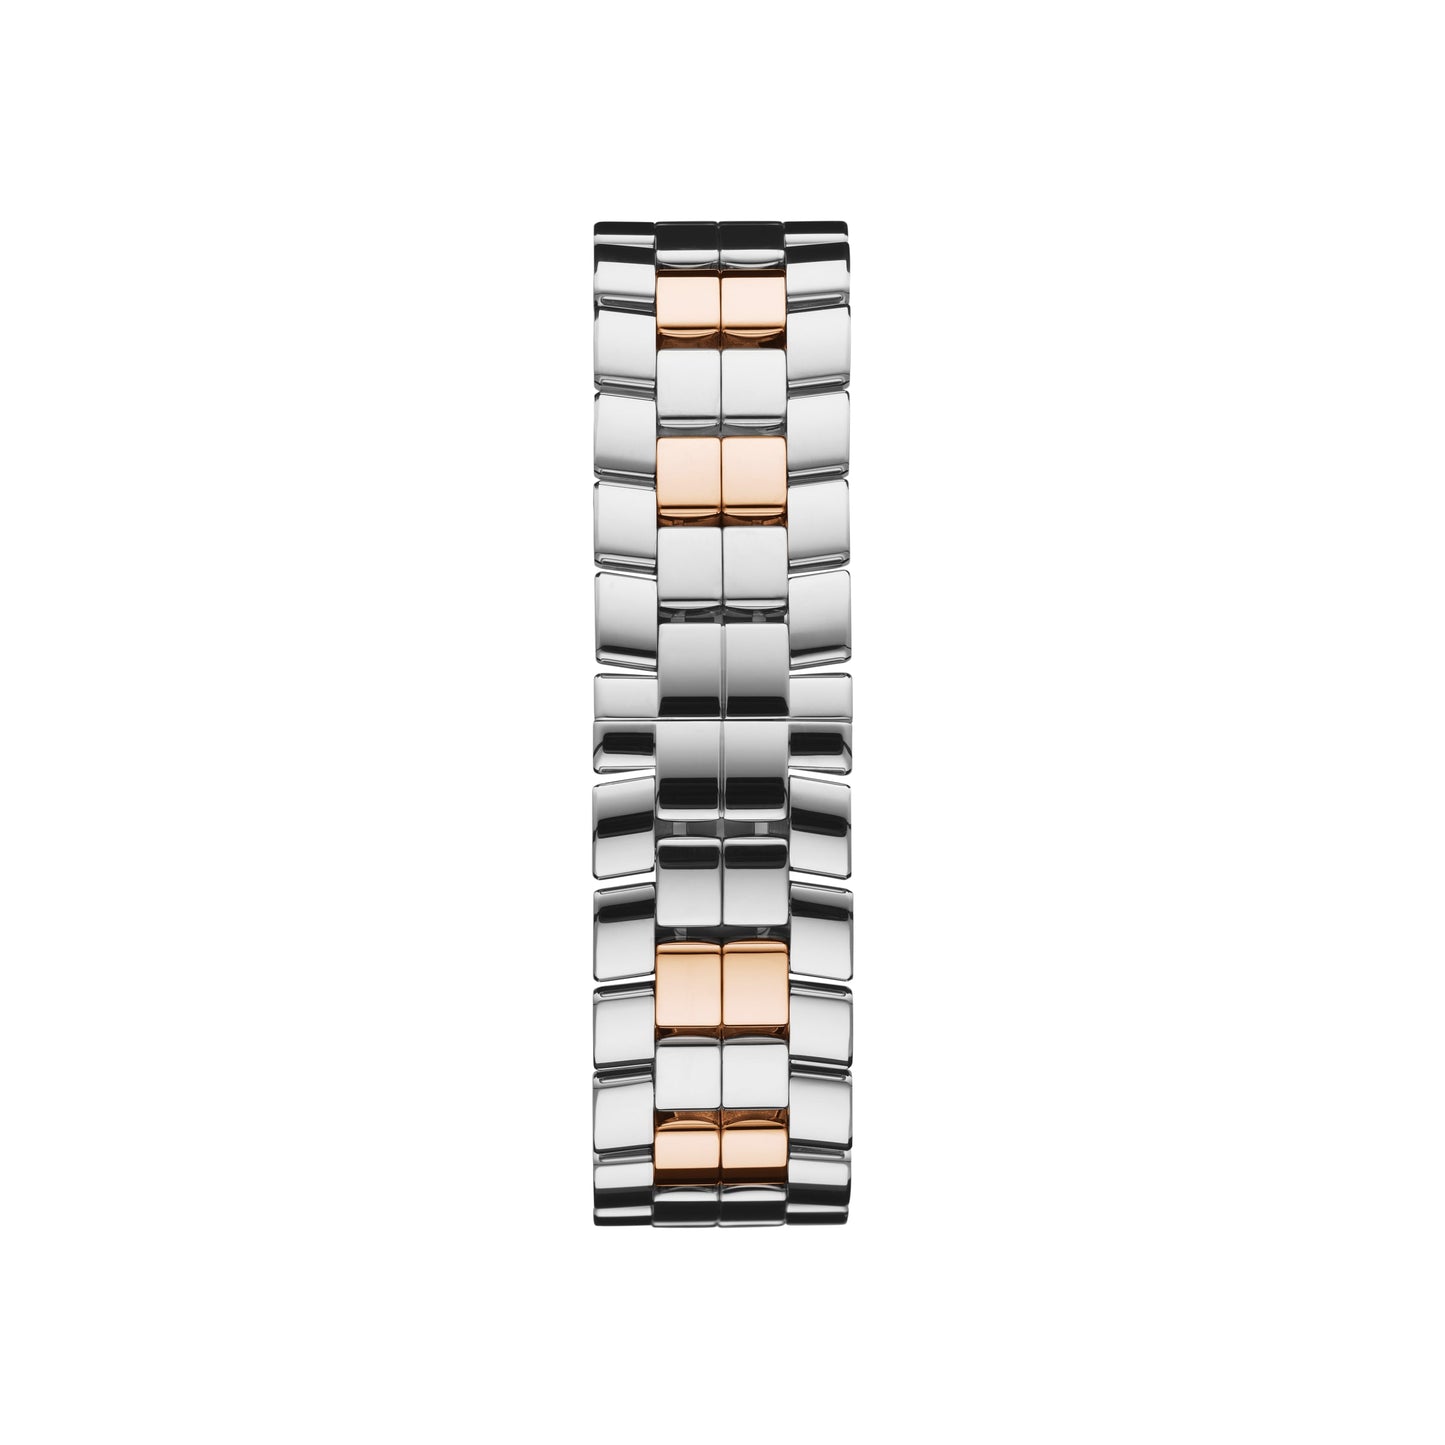 HAPPY SPORT 36 MM, AUTOMATIC, ETHICAL ROSE GOLD, LUCENT STEEL™, DIAMONDS 278559-6026